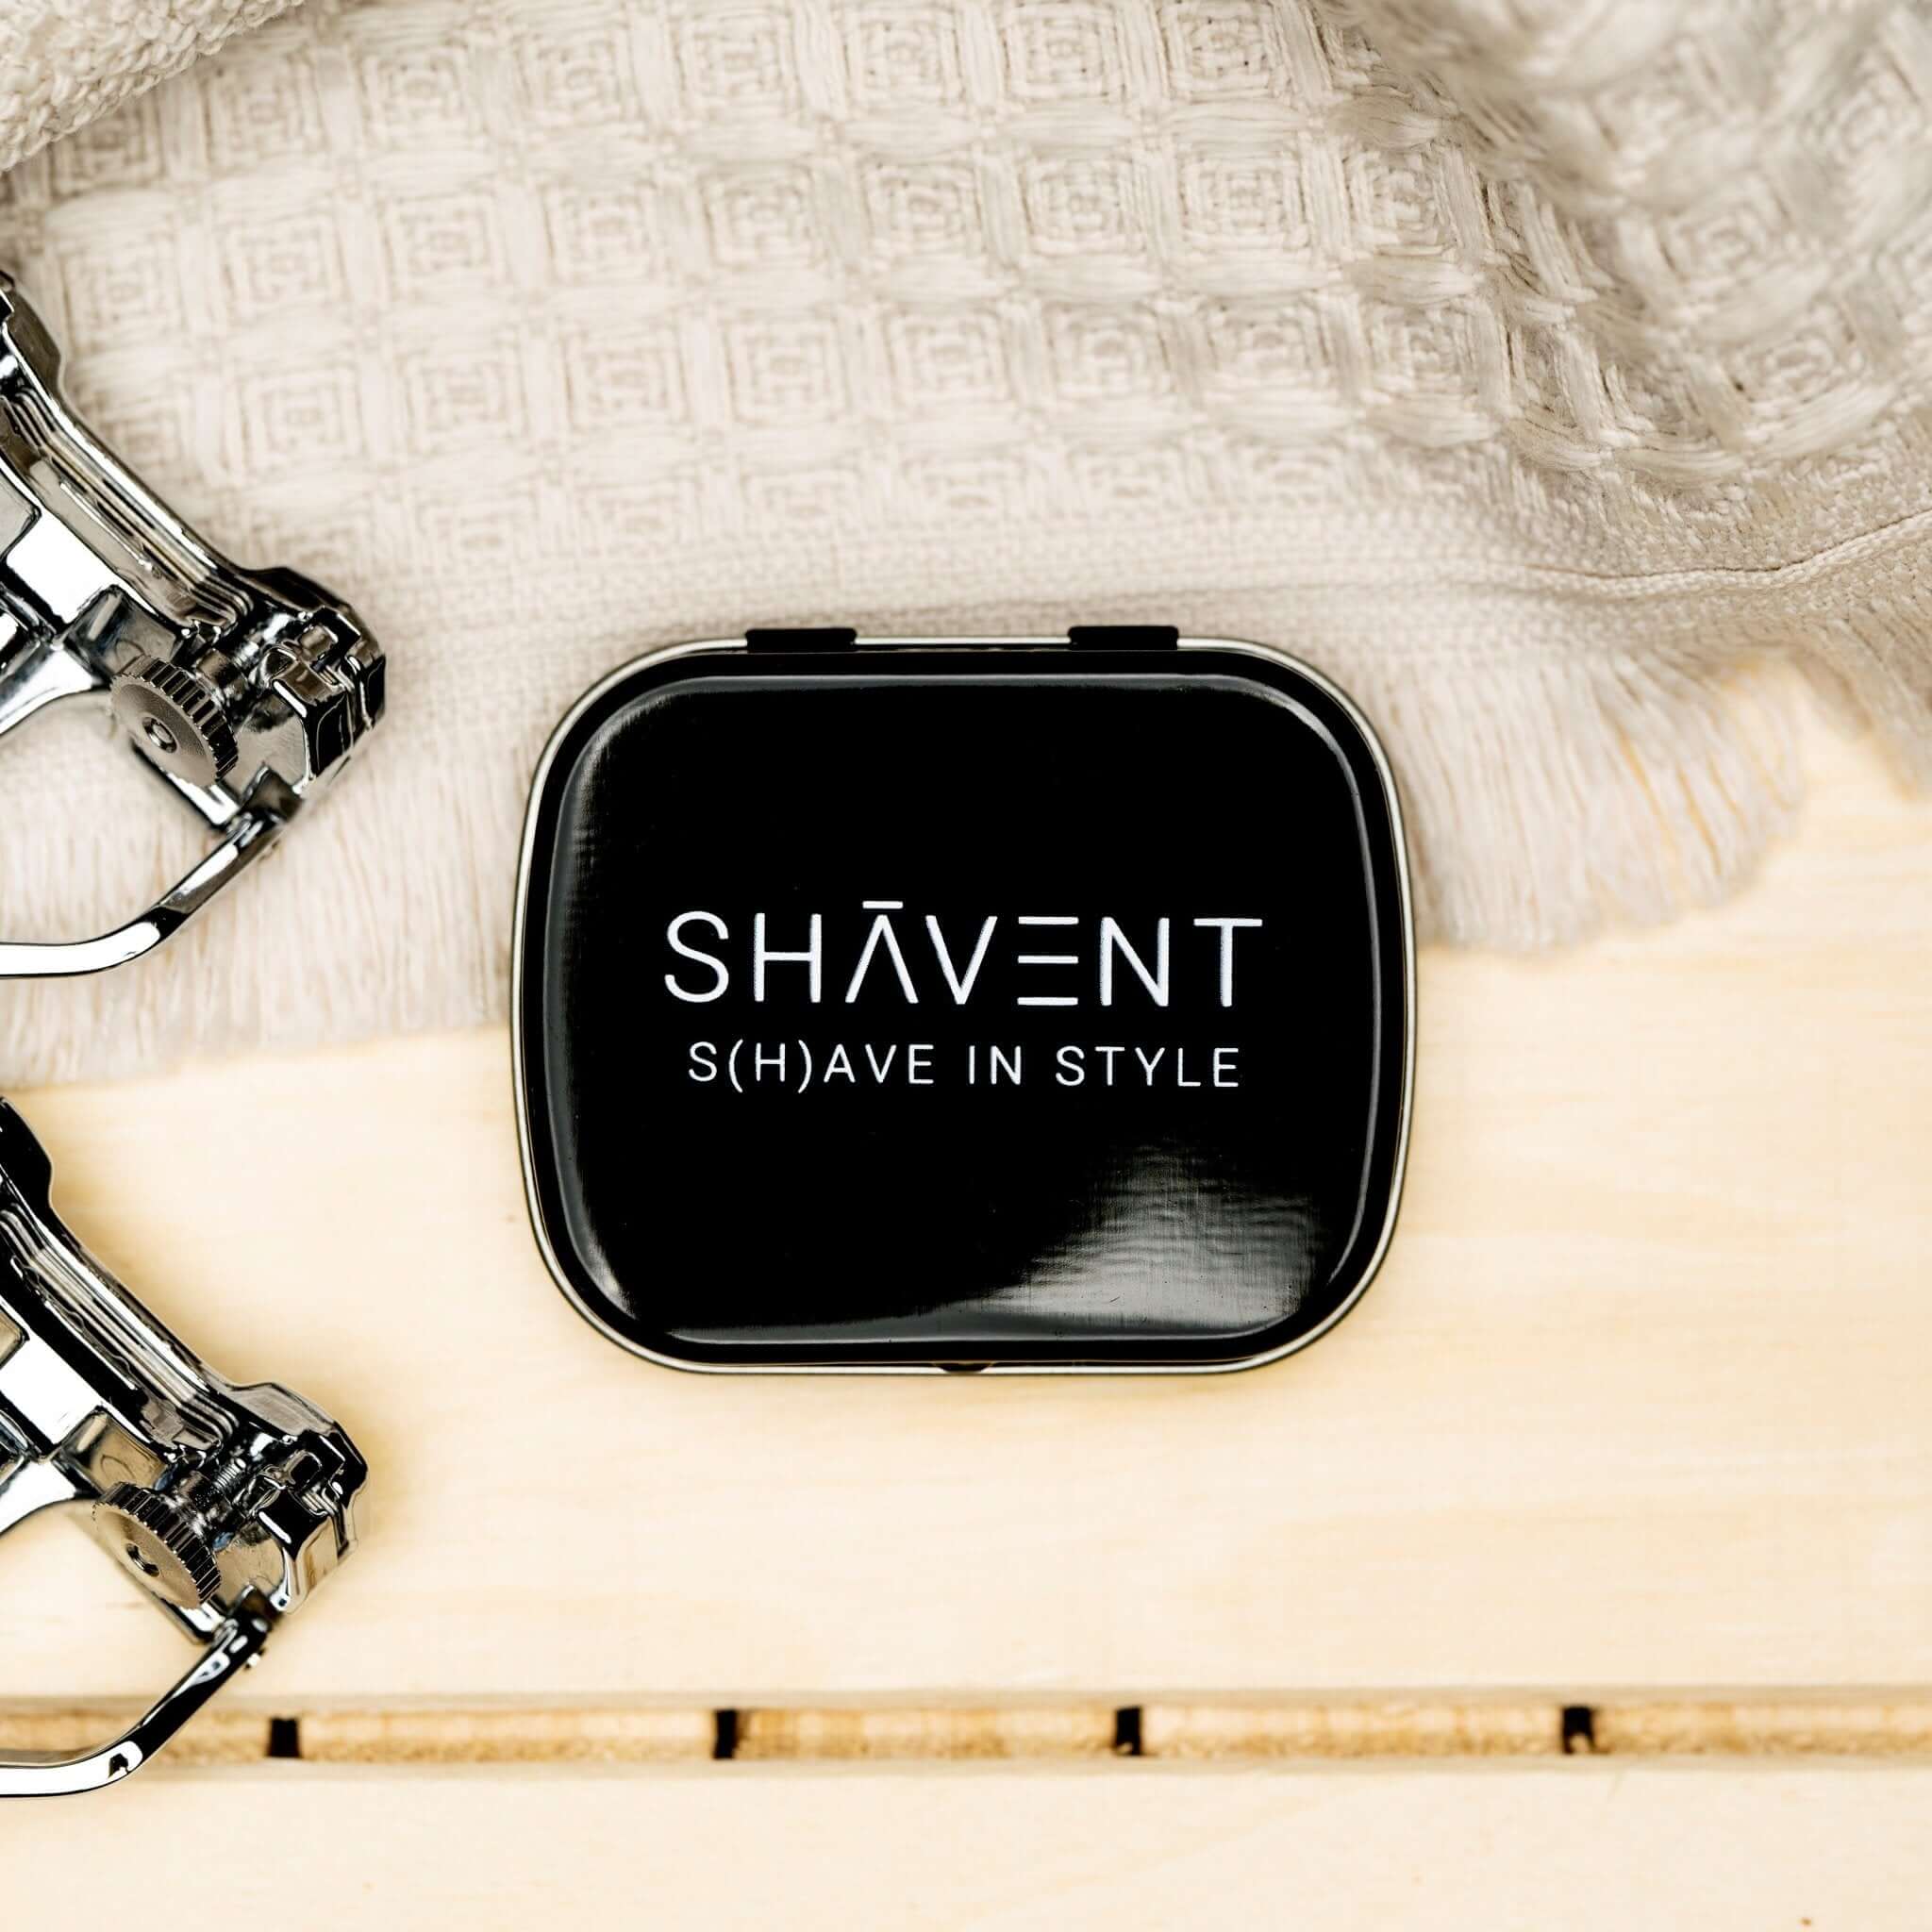 SHAVENT Shop - all you need for a gentle, plastic-free shave